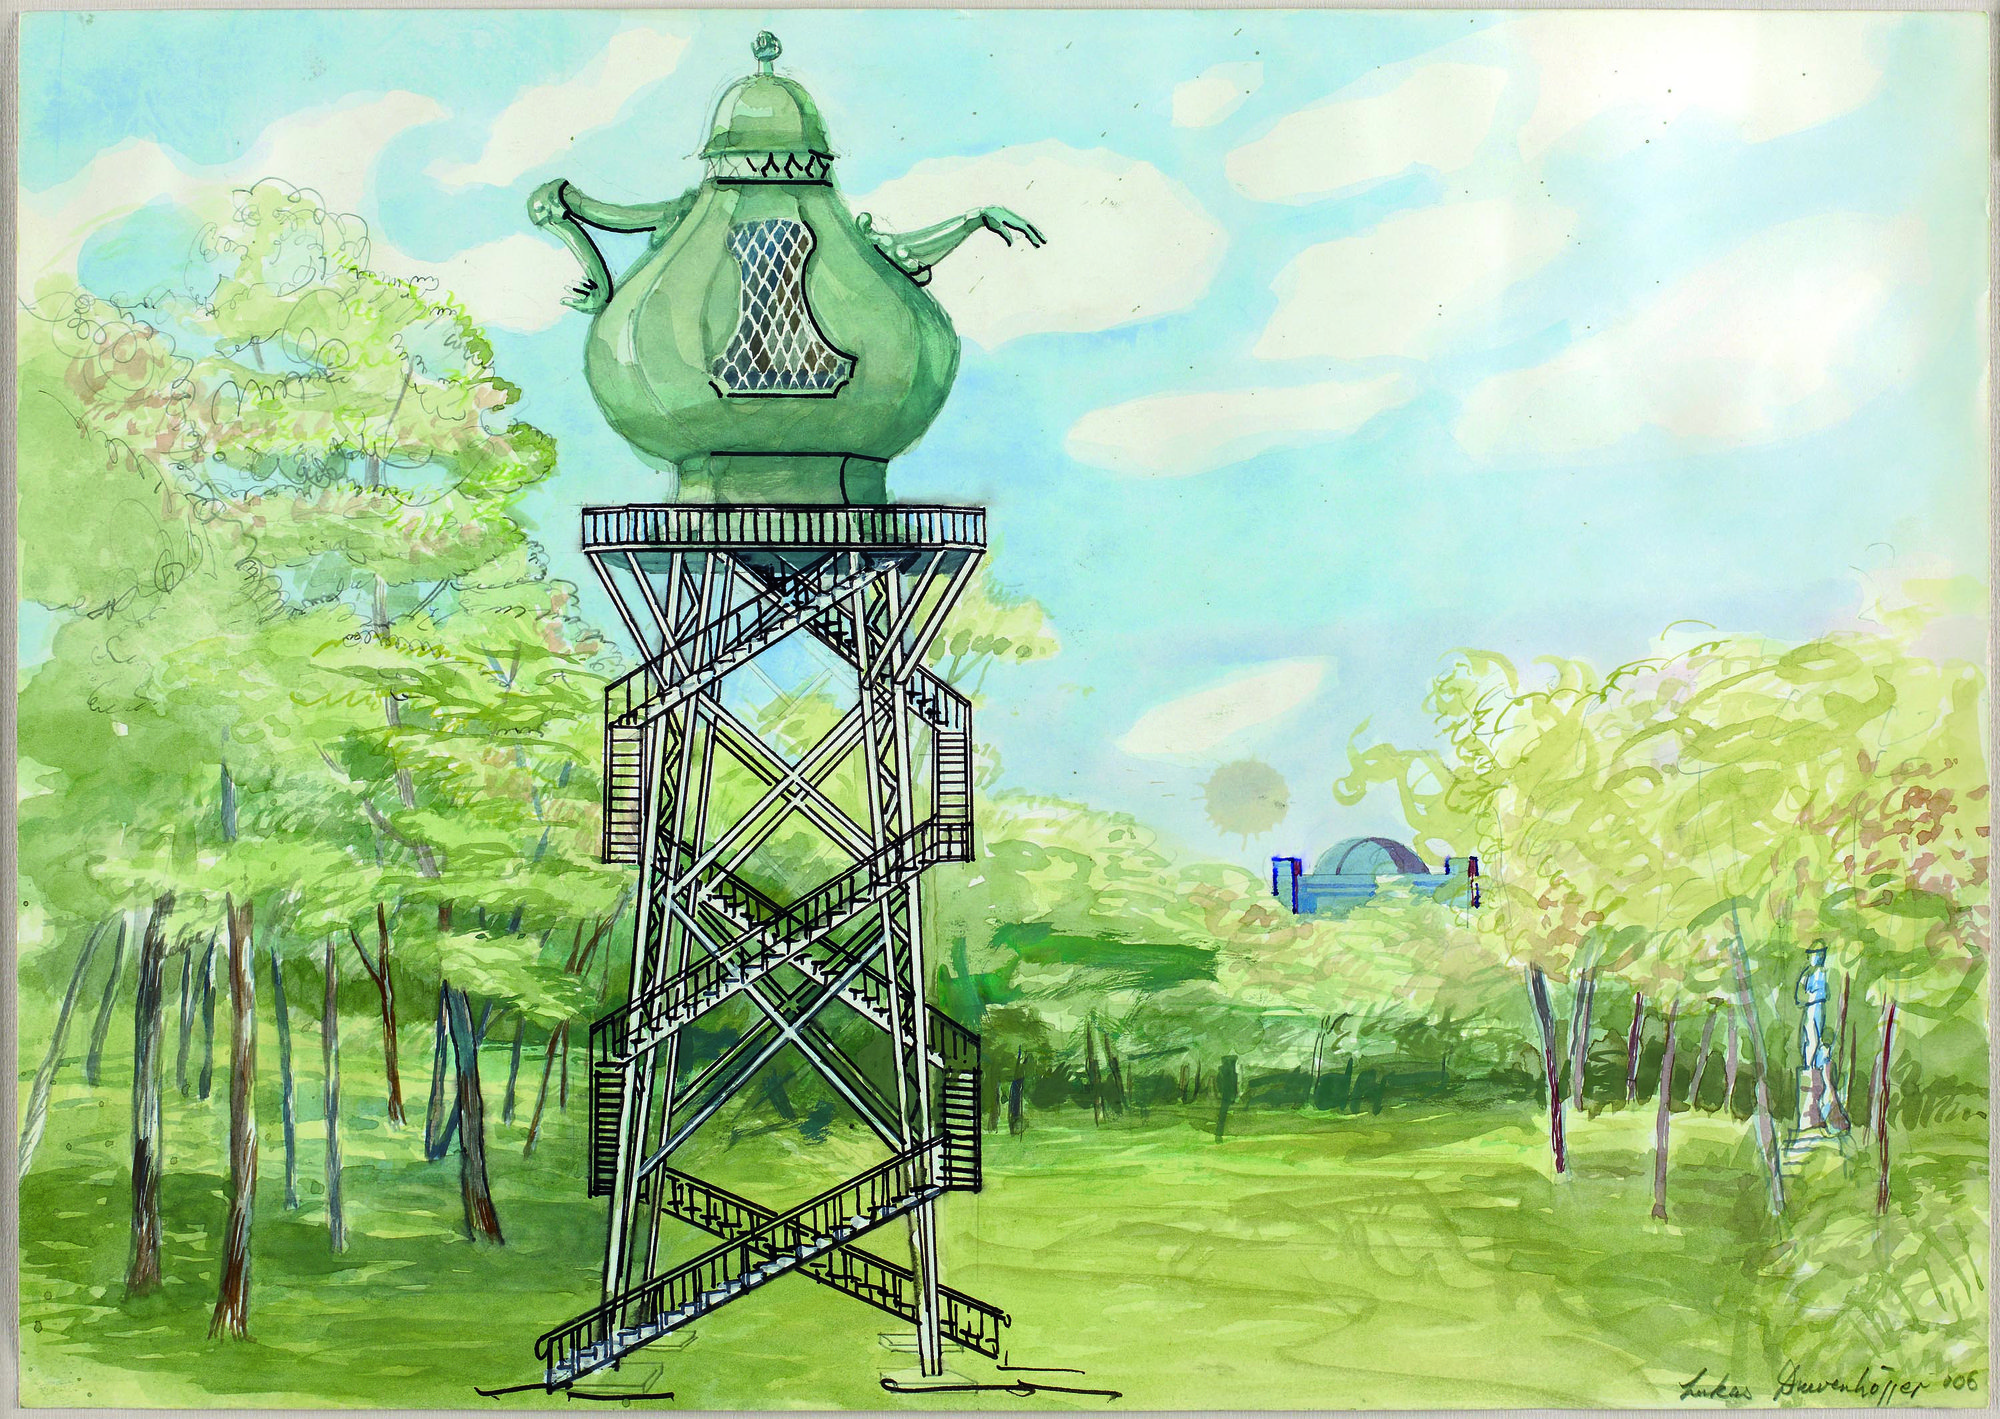 Lukas Duwenhögger, The Celestial Teapot, Proposal for a memorial site for the persecuted homosexual victims of National Socialism in Berlin, gouache, pencil and pen on paper, 29.7 x 42 cm, 2006